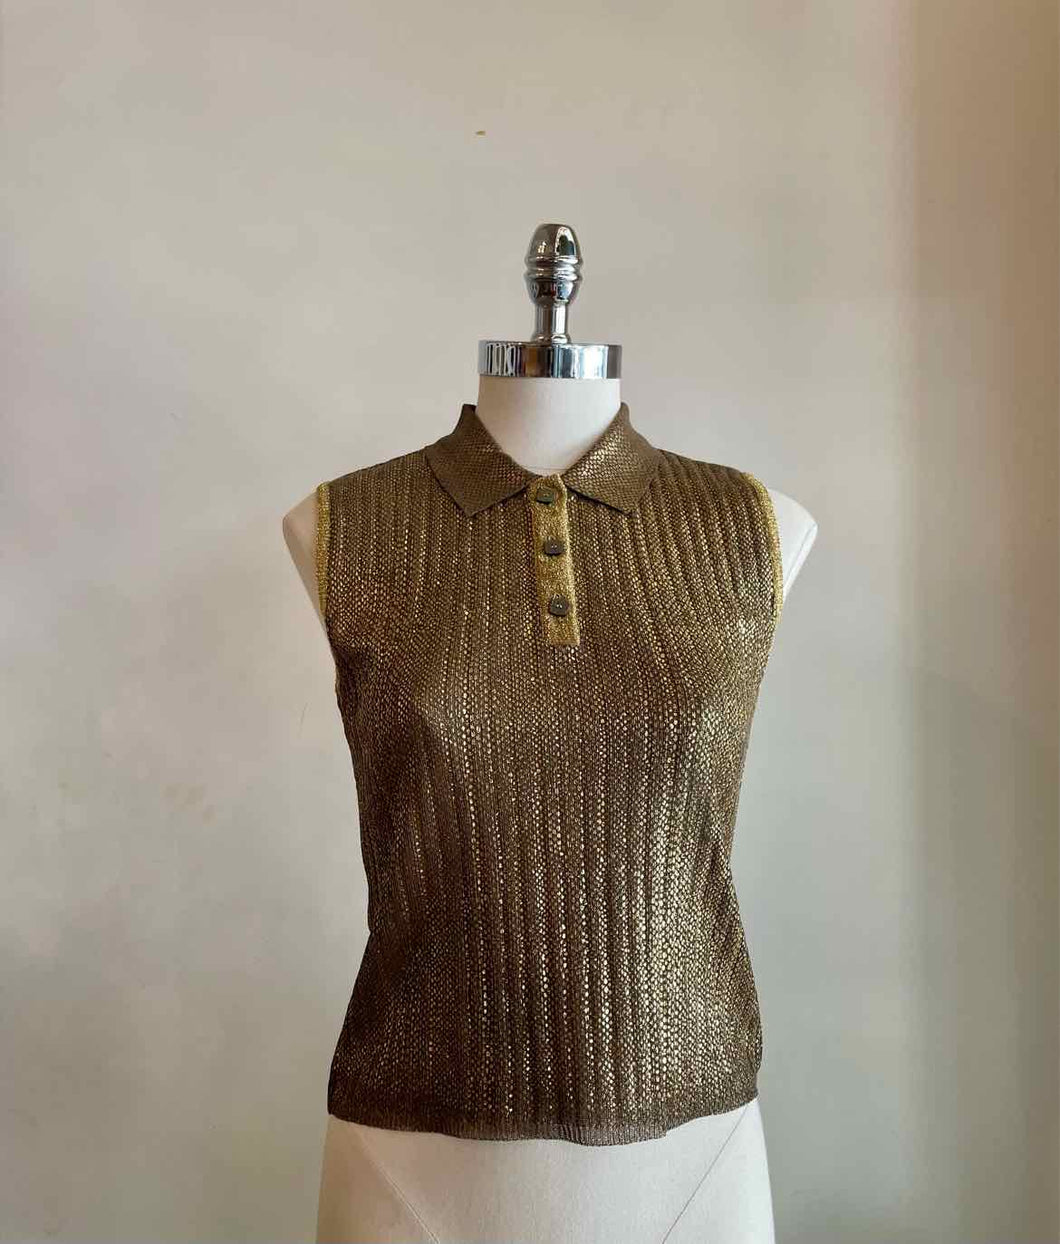 CHANEL Size 2 Gold Blouse